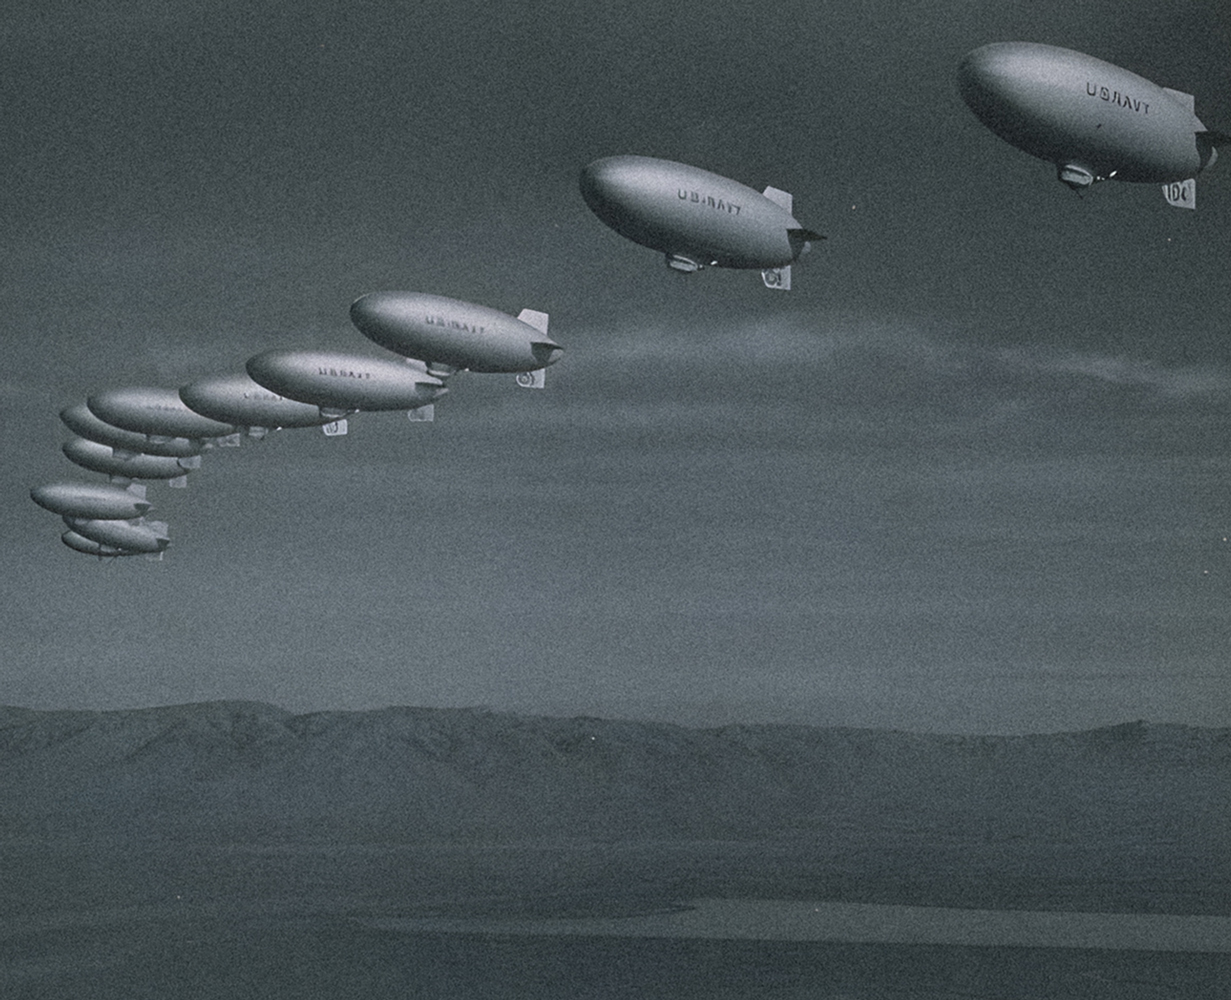 A curving row of 11 closely spaced blimps, with U.S.NAVY written on their sides, soar above a mountain ridgeline and the San Francisco Bay.